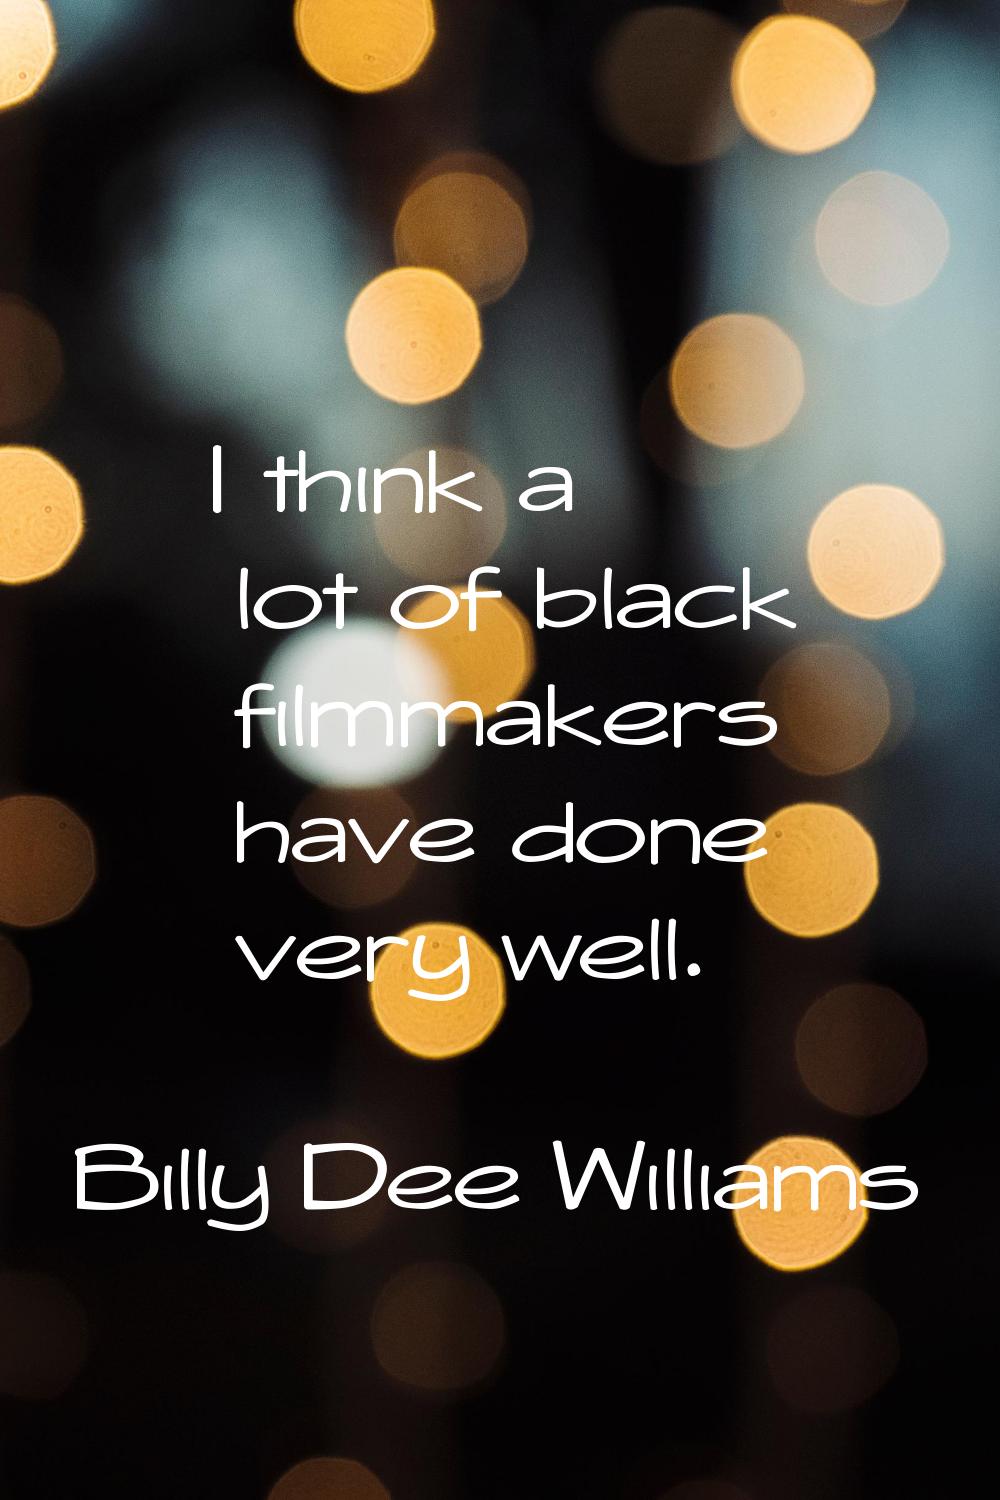 I think a lot of black filmmakers have done very well.